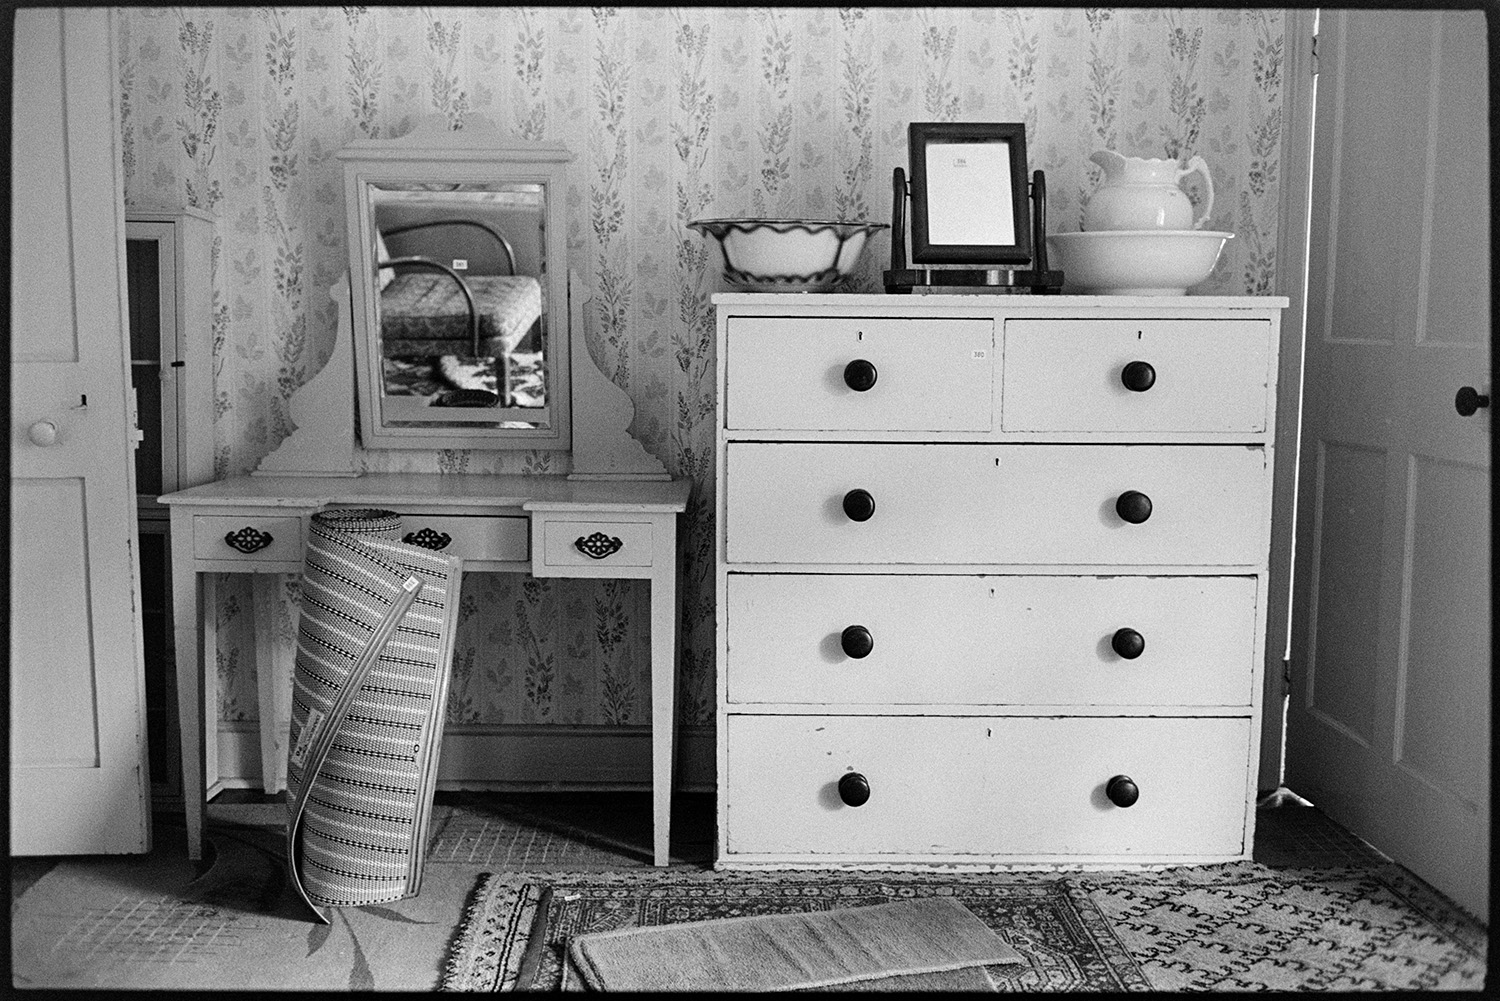 People viewing house contents before sale, bedroom furniture. Pot under bed, women and lace. 
[Items in Arscotts House, Dolton on the viewing day before the contents of the house are sold. A dressing table, chest of drawers, mirror, chamber pot and rugs are visible. The wall is covered with patterned wallpaper.]